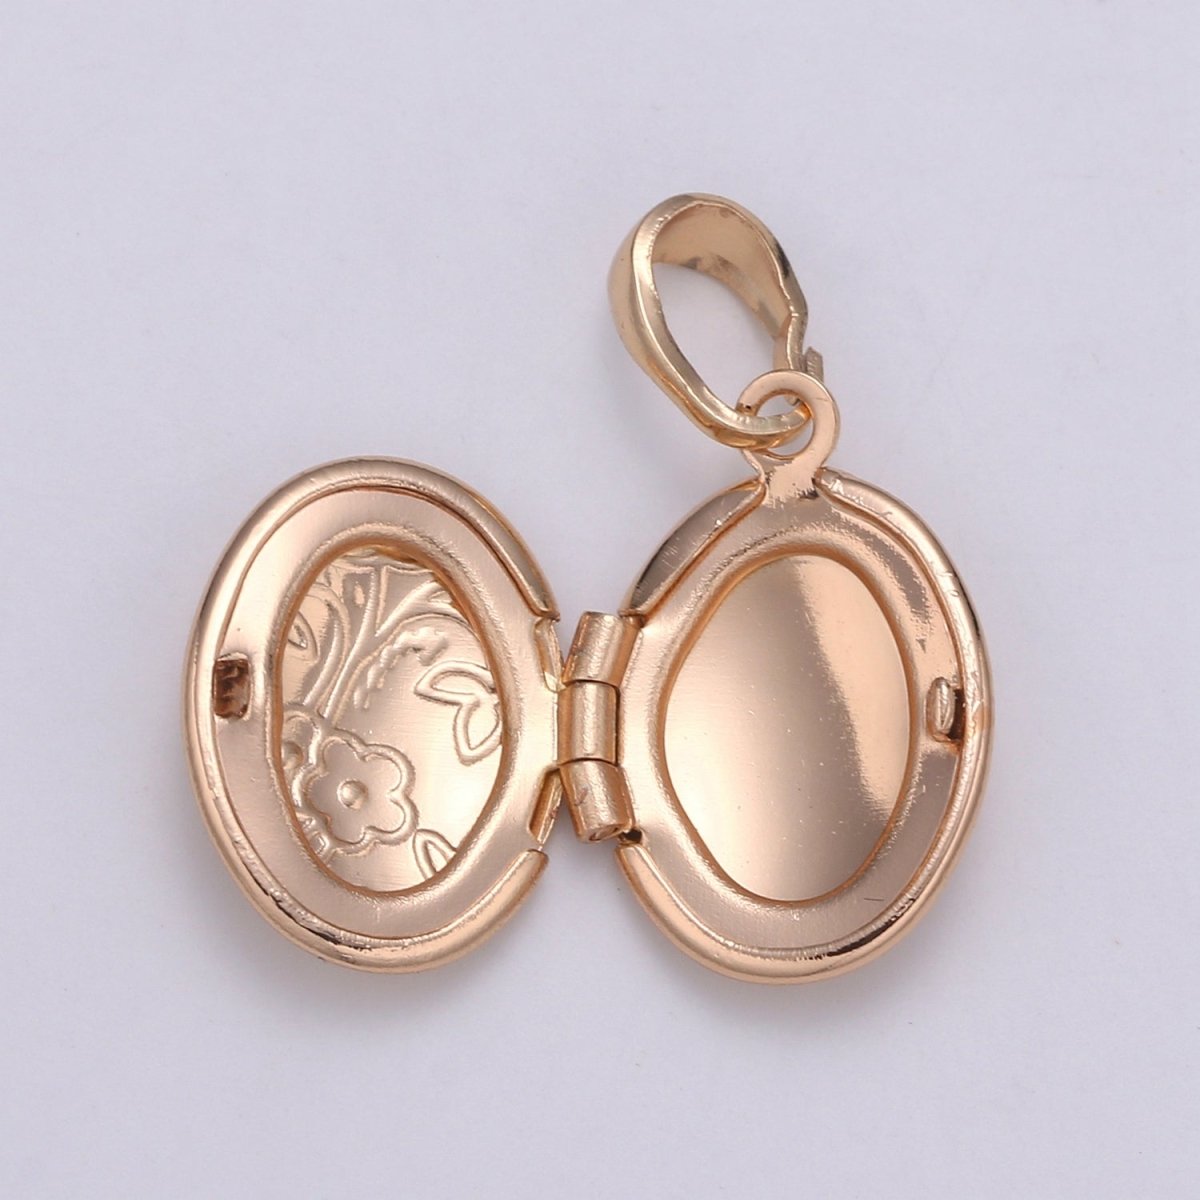 Rose Gold Filled Oval Locket Flower Photo Locket, Minimalist Jewelry, Necklace Pendant for Jewelry Making supply H-127 - DLUXCA